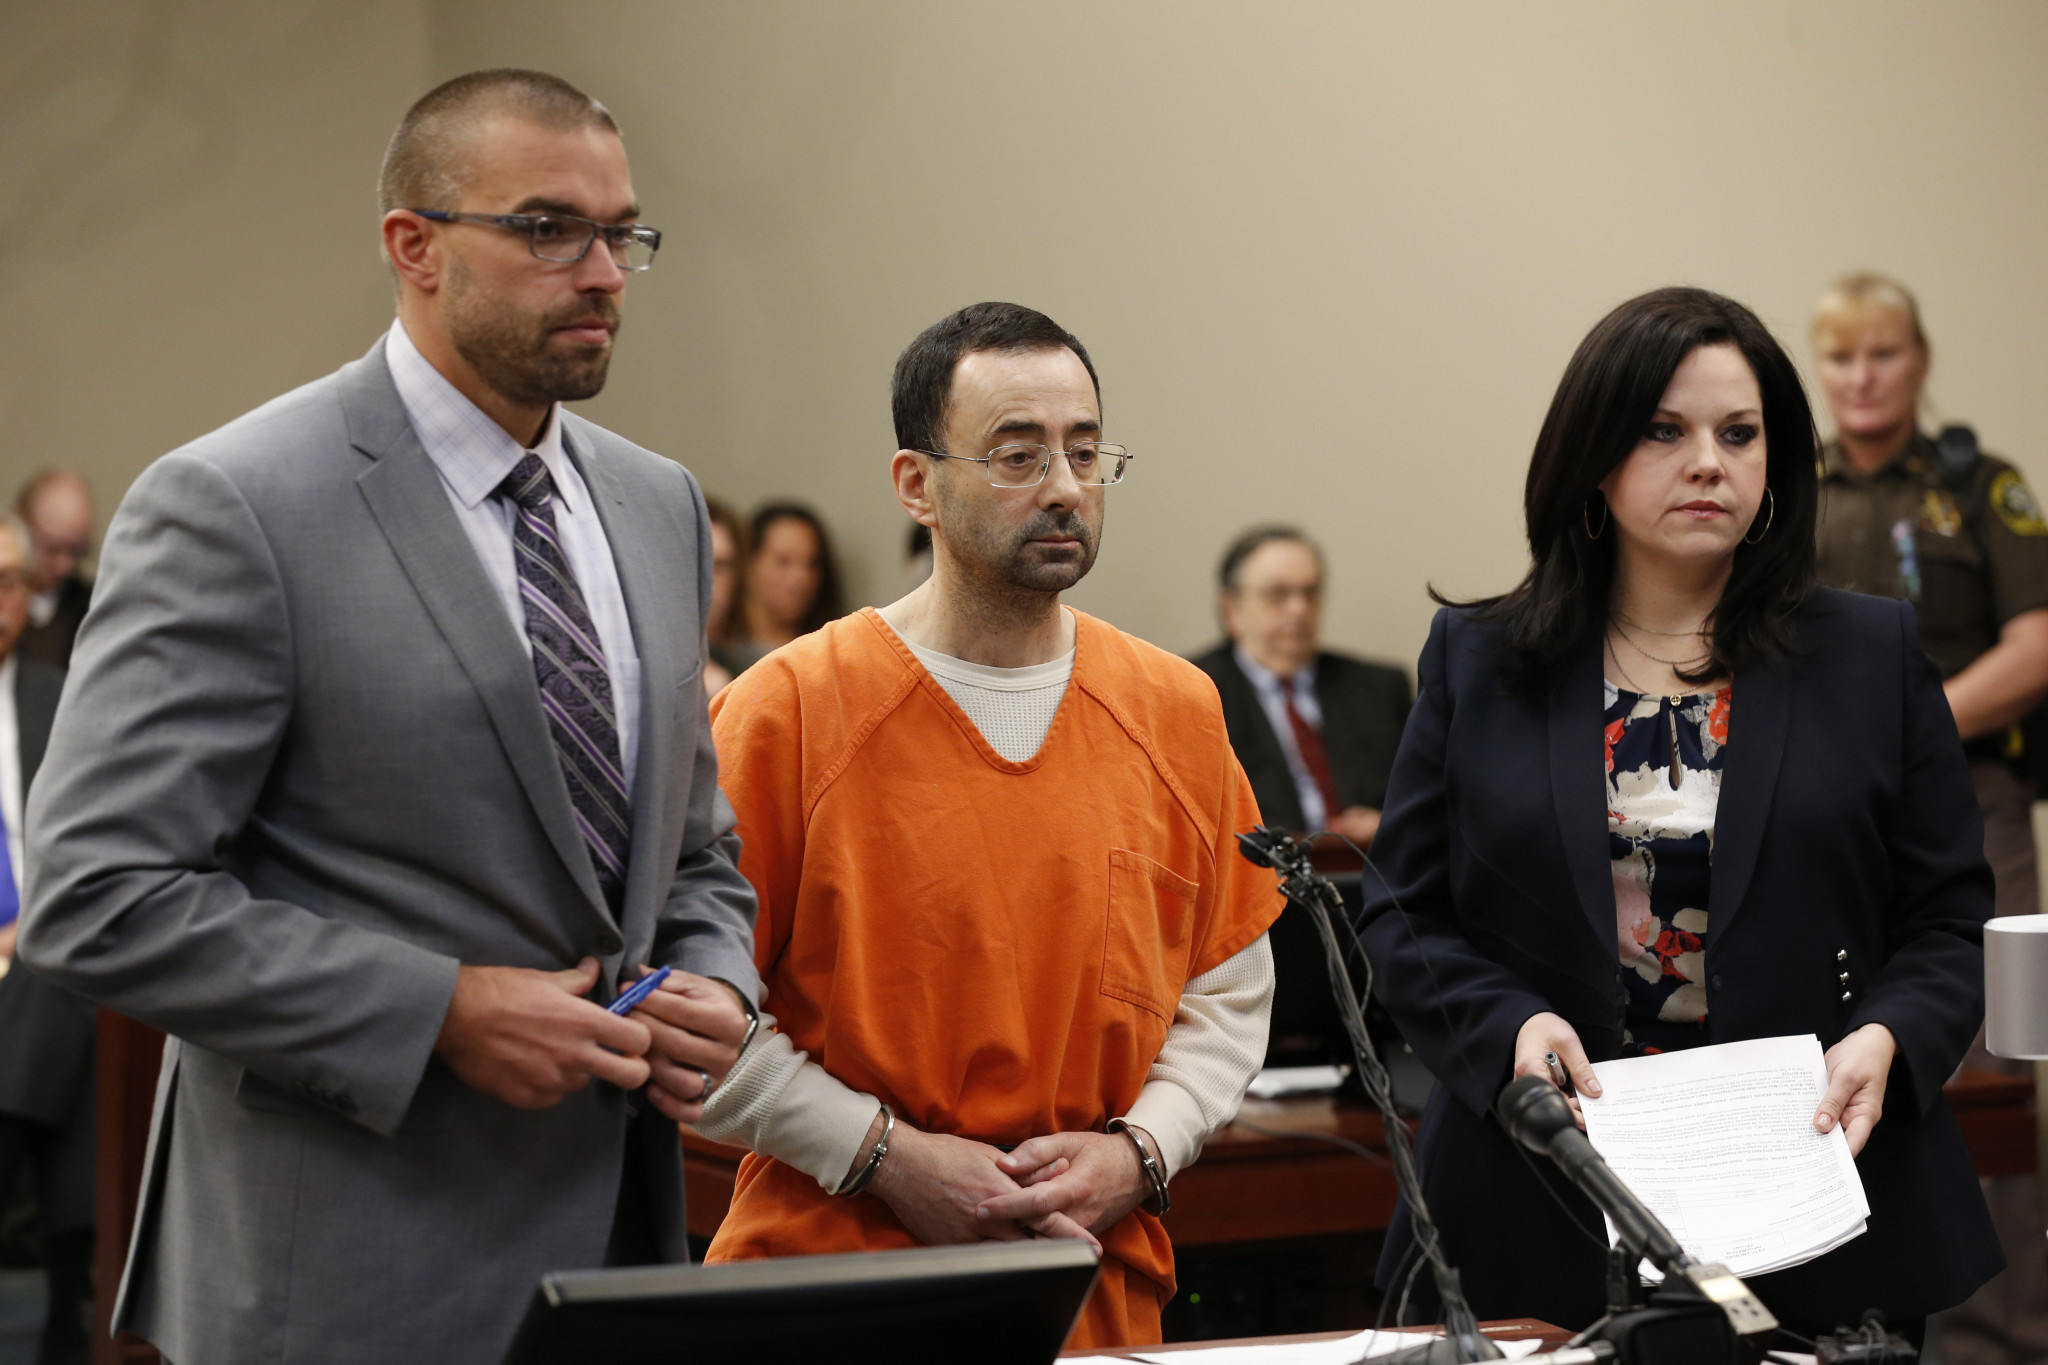 Former USA Gymnastics doctor sentenced to 60 years in prison for child abuse images